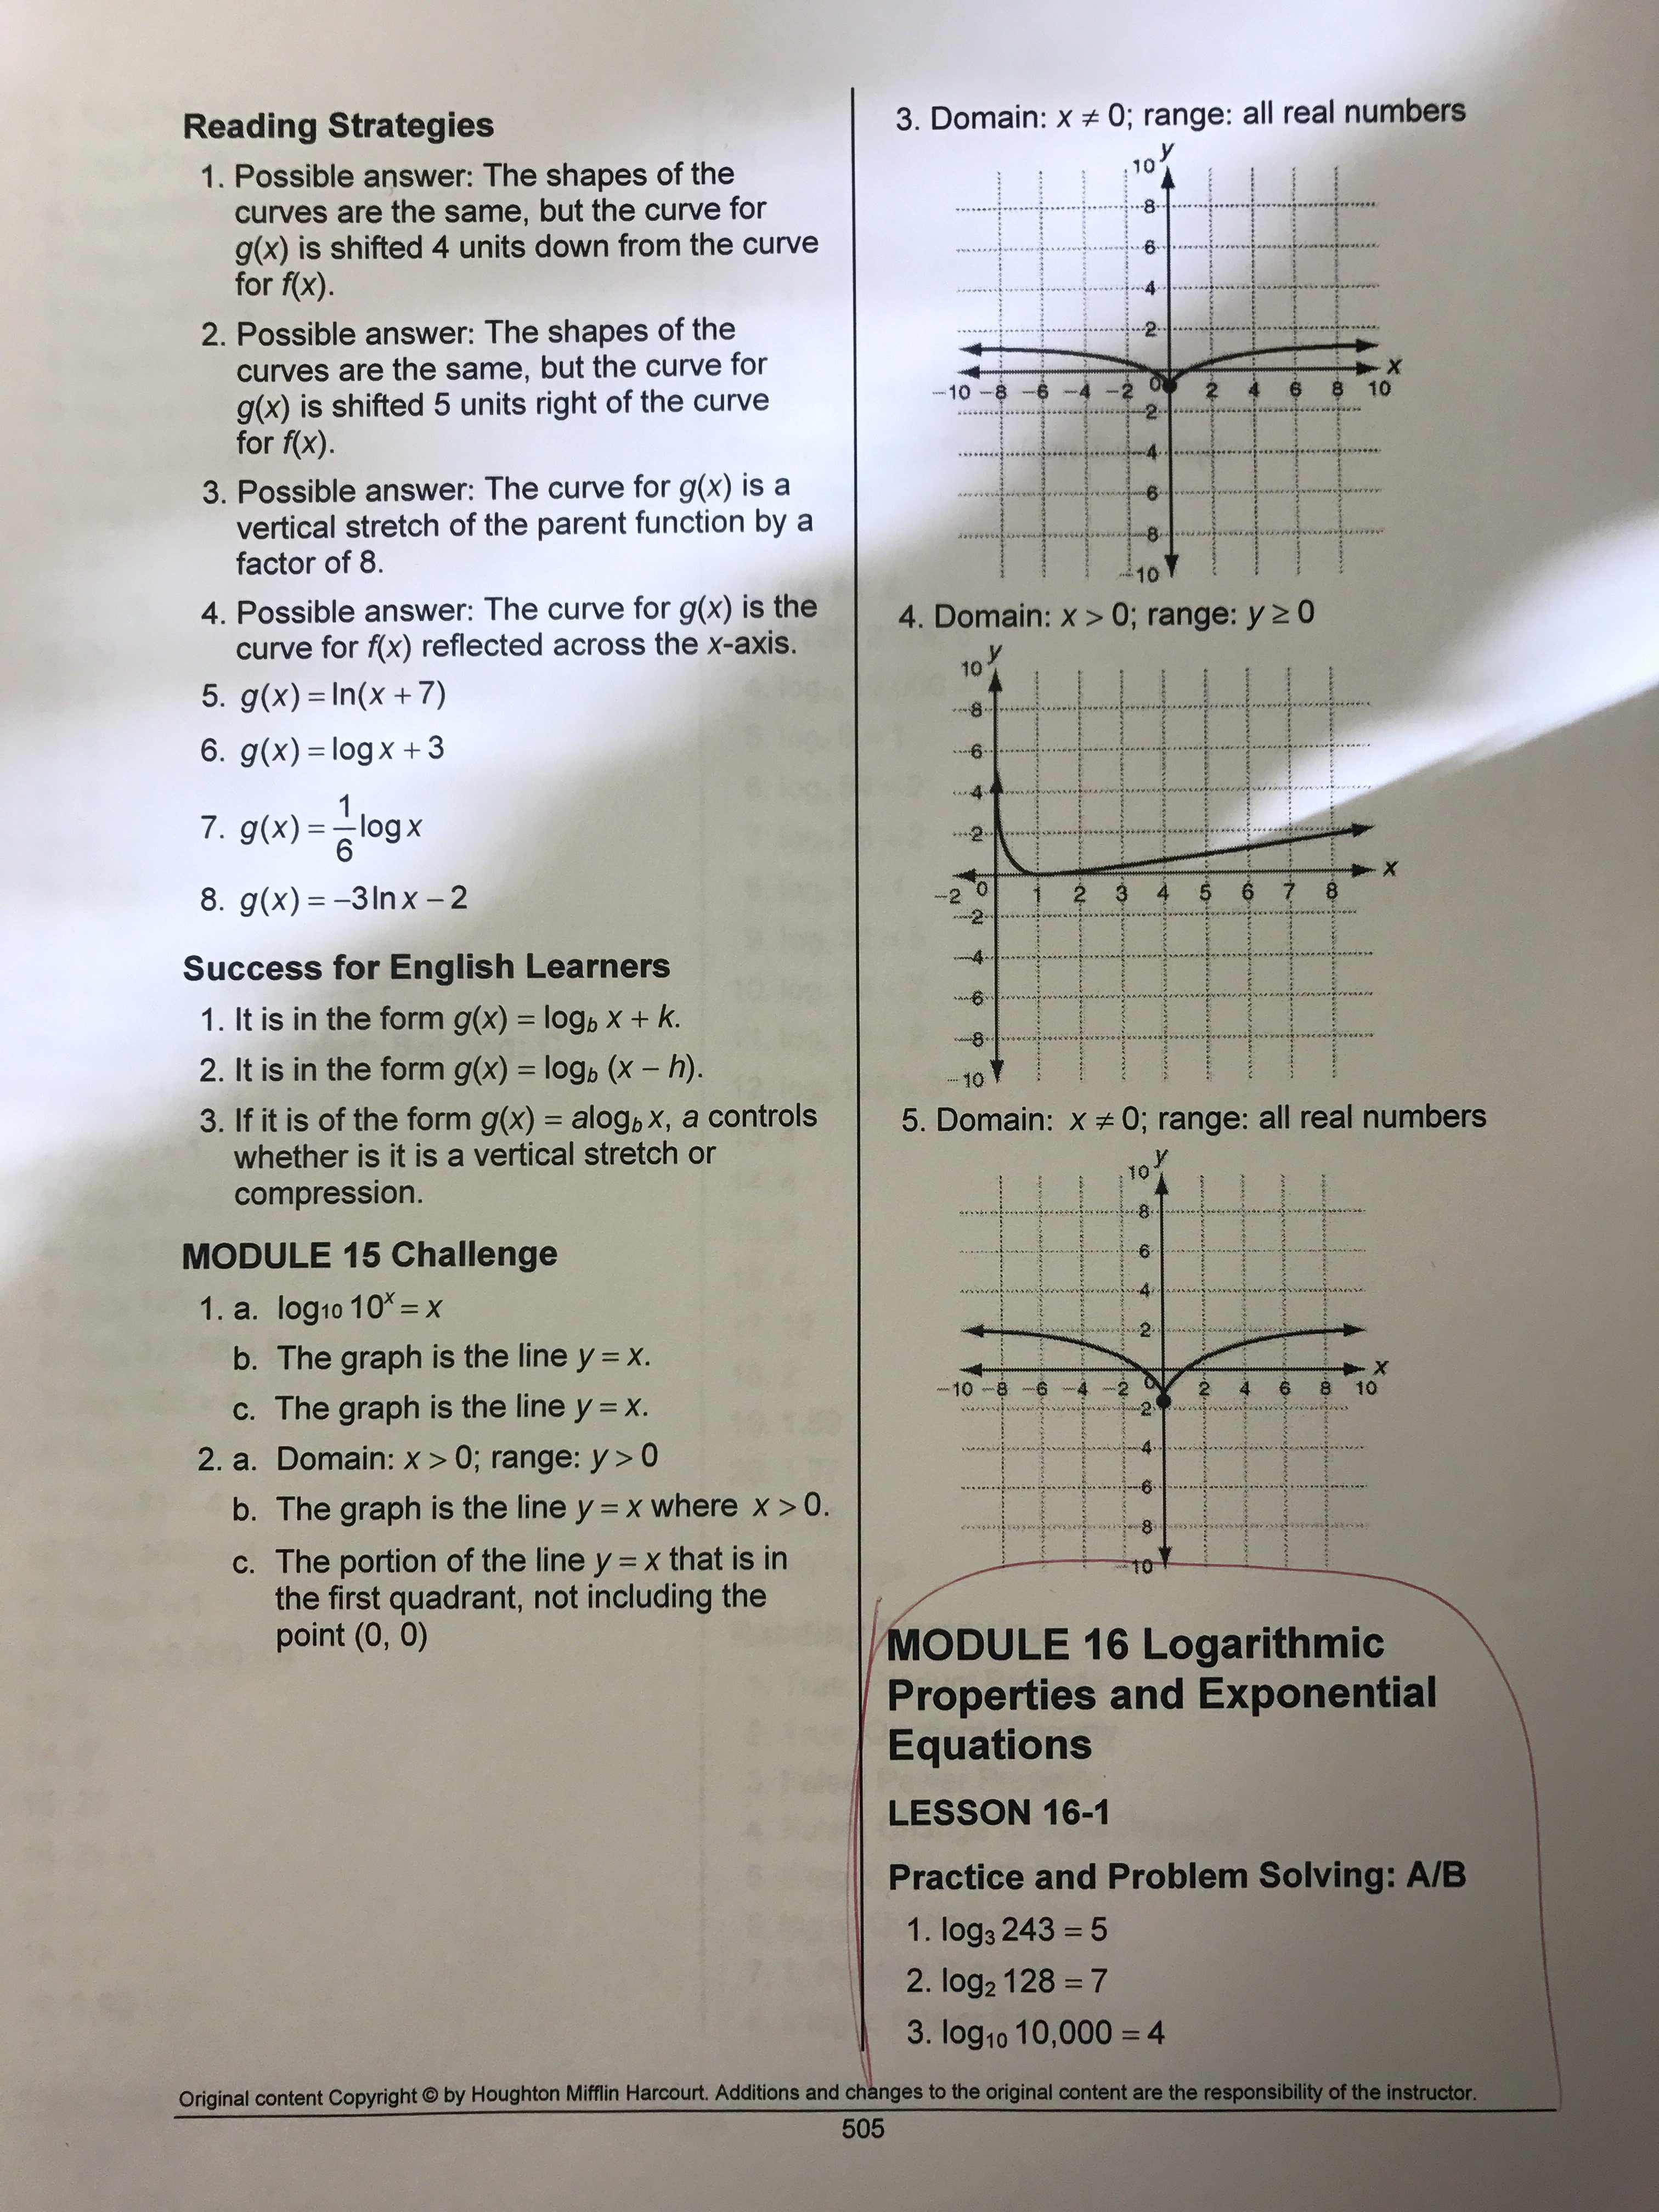 Standard Deviation Worksheet with Answers Awesome Standard Deviation Practice Worksheet with Answers